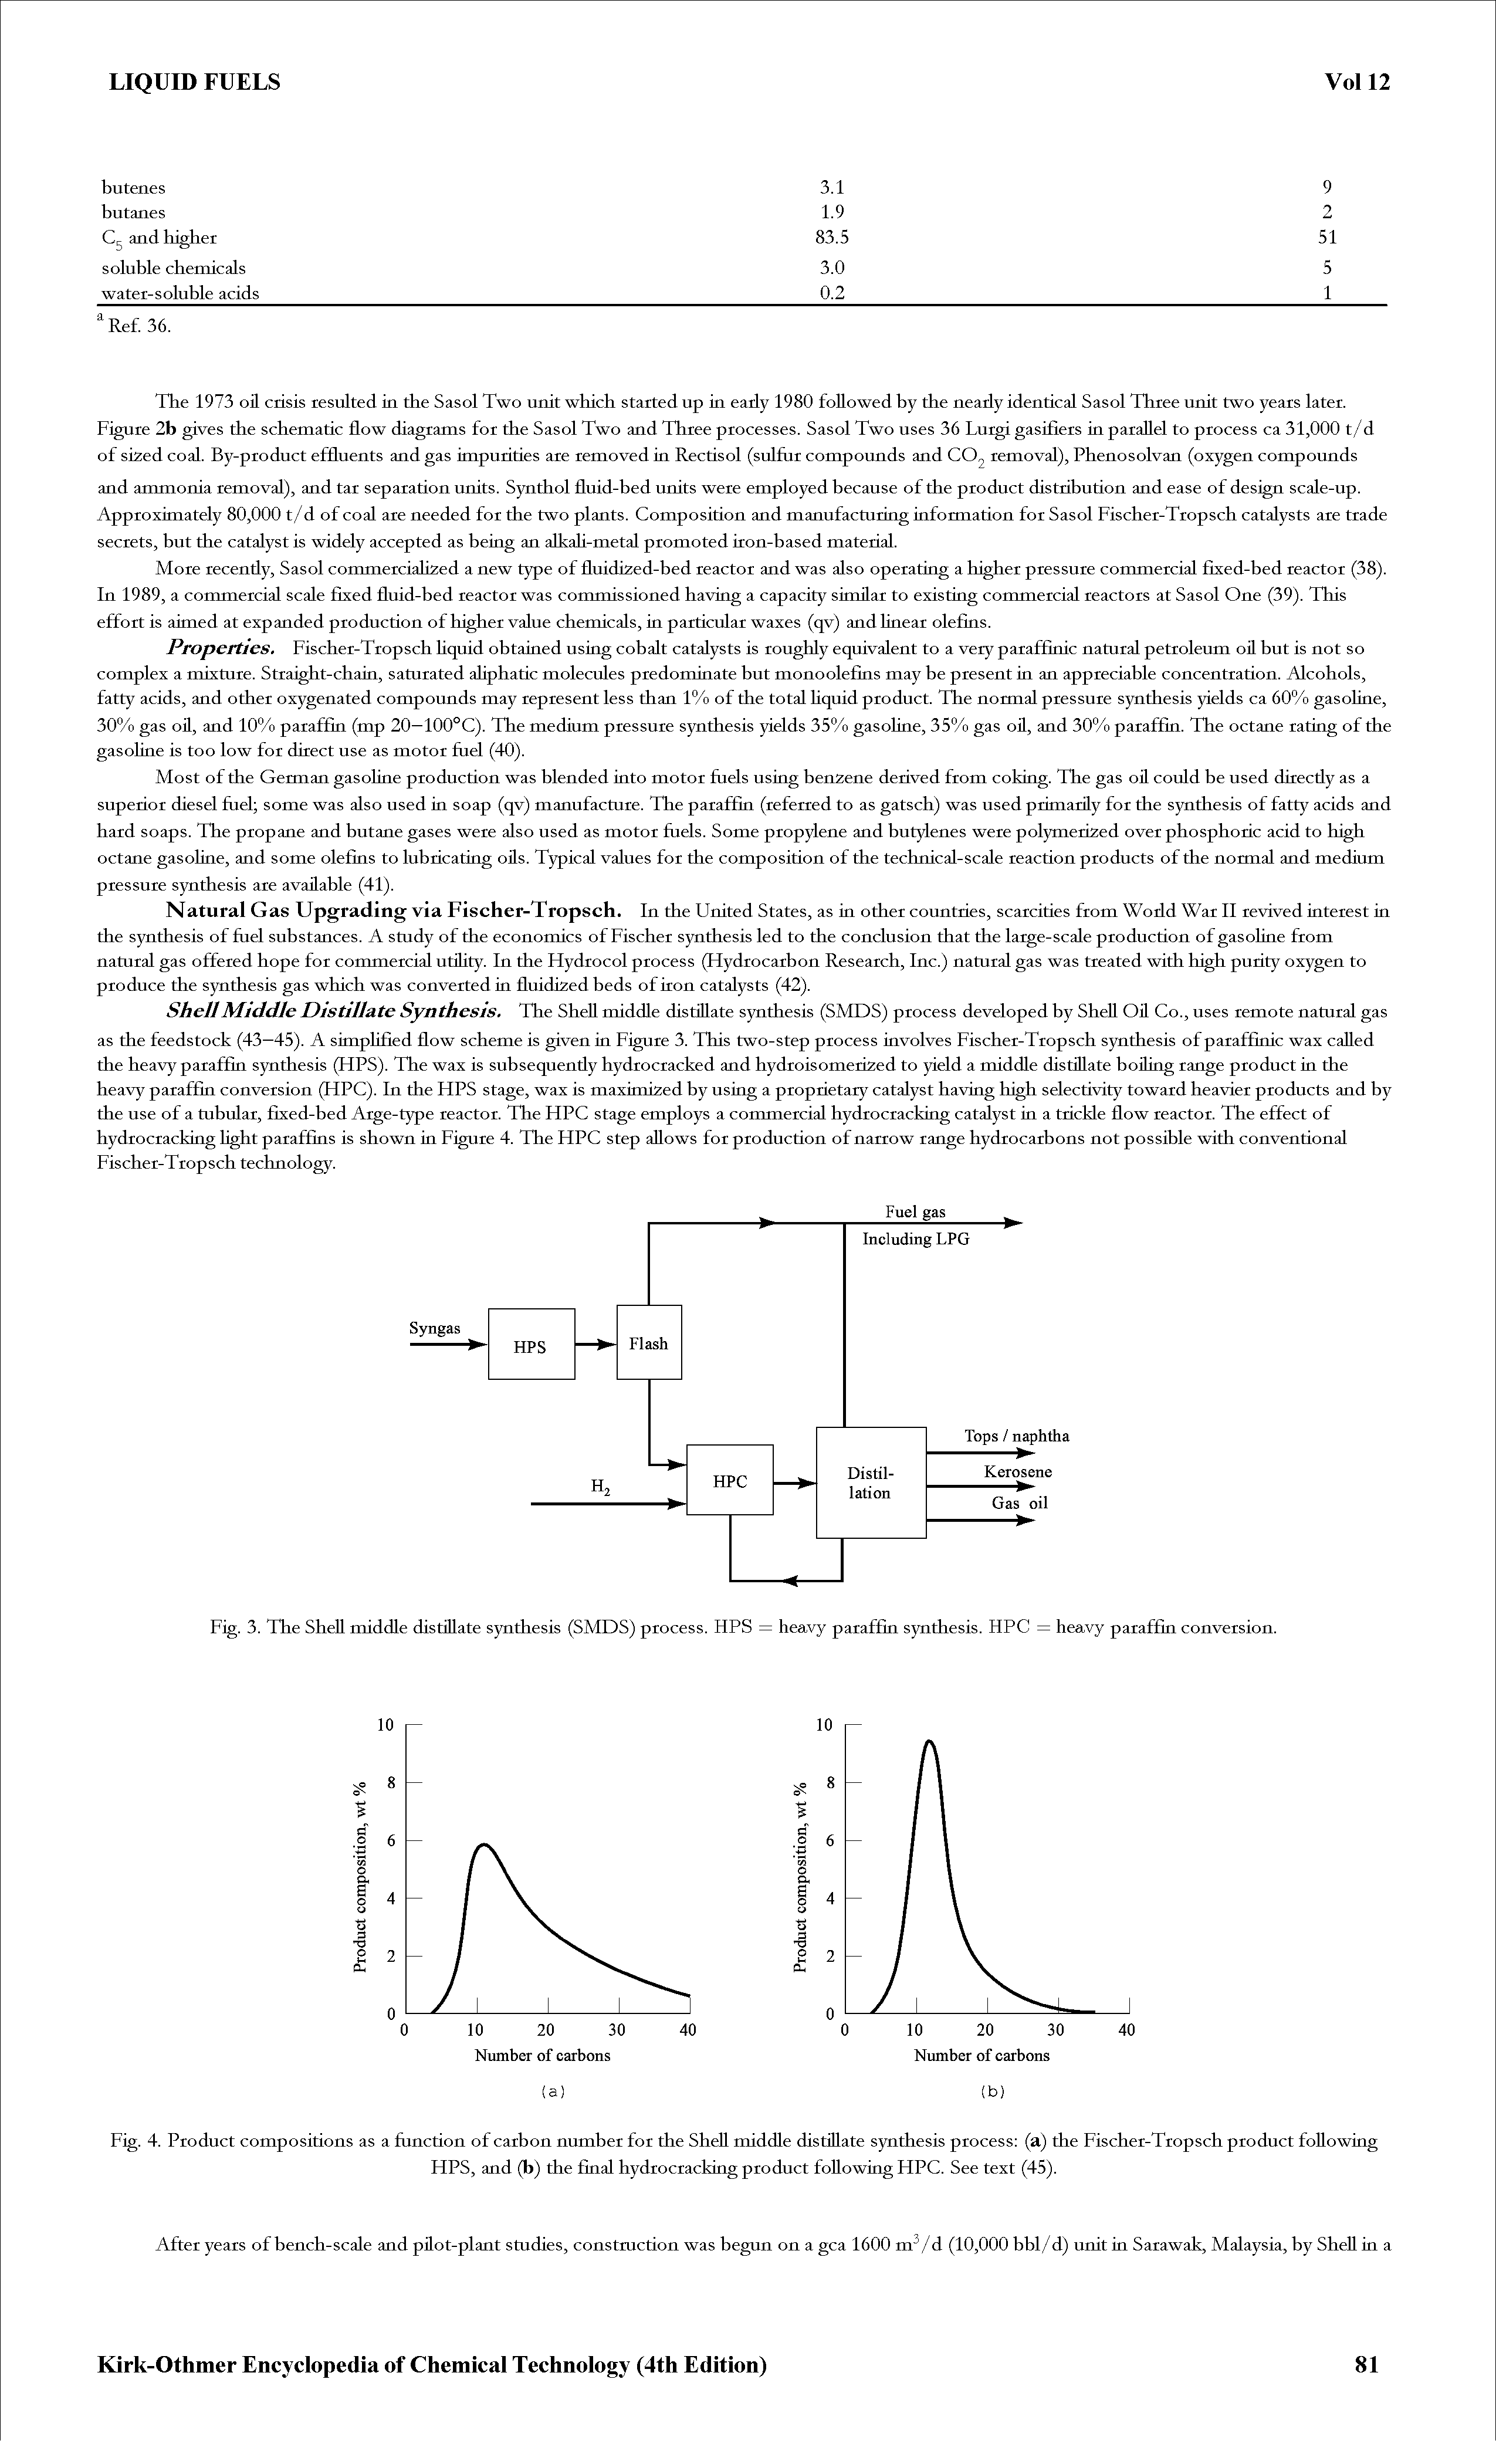 Fig. 4. Product compositions as a function of carbon number for the Shell middle distillate synthesis process (a) the Fischer-Tropsch product following...